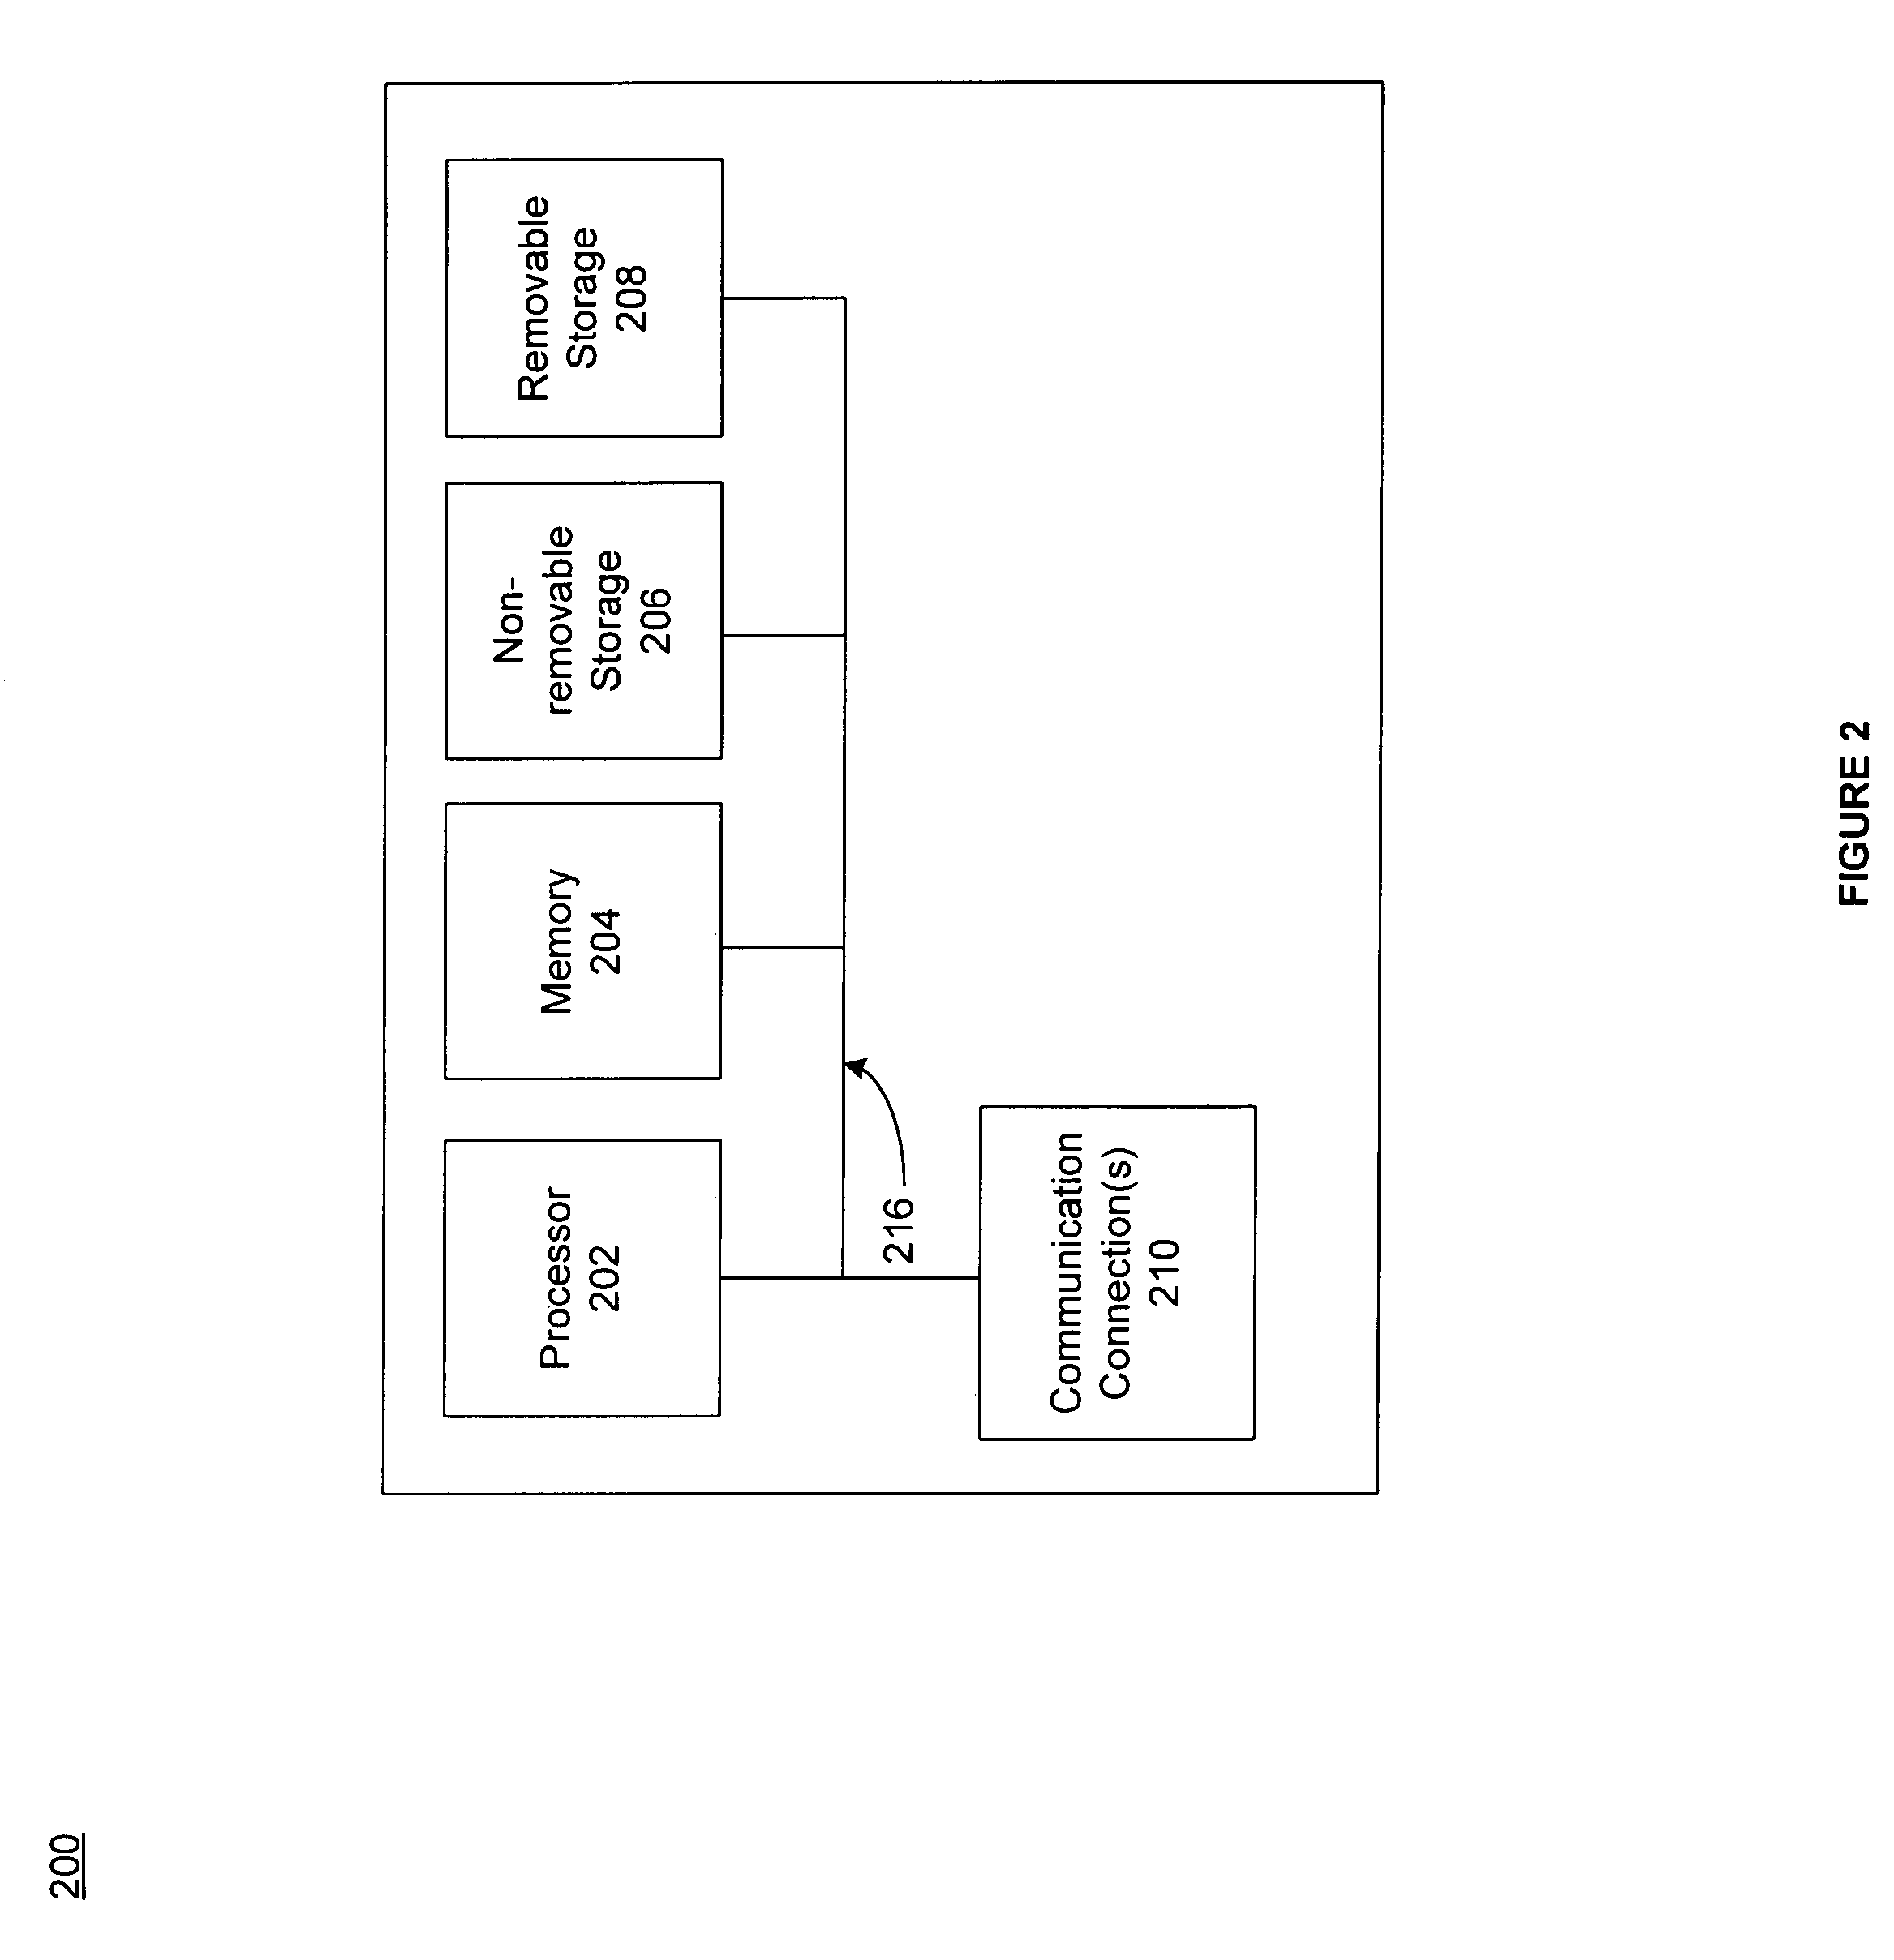 Method and system for accessing wireless account information